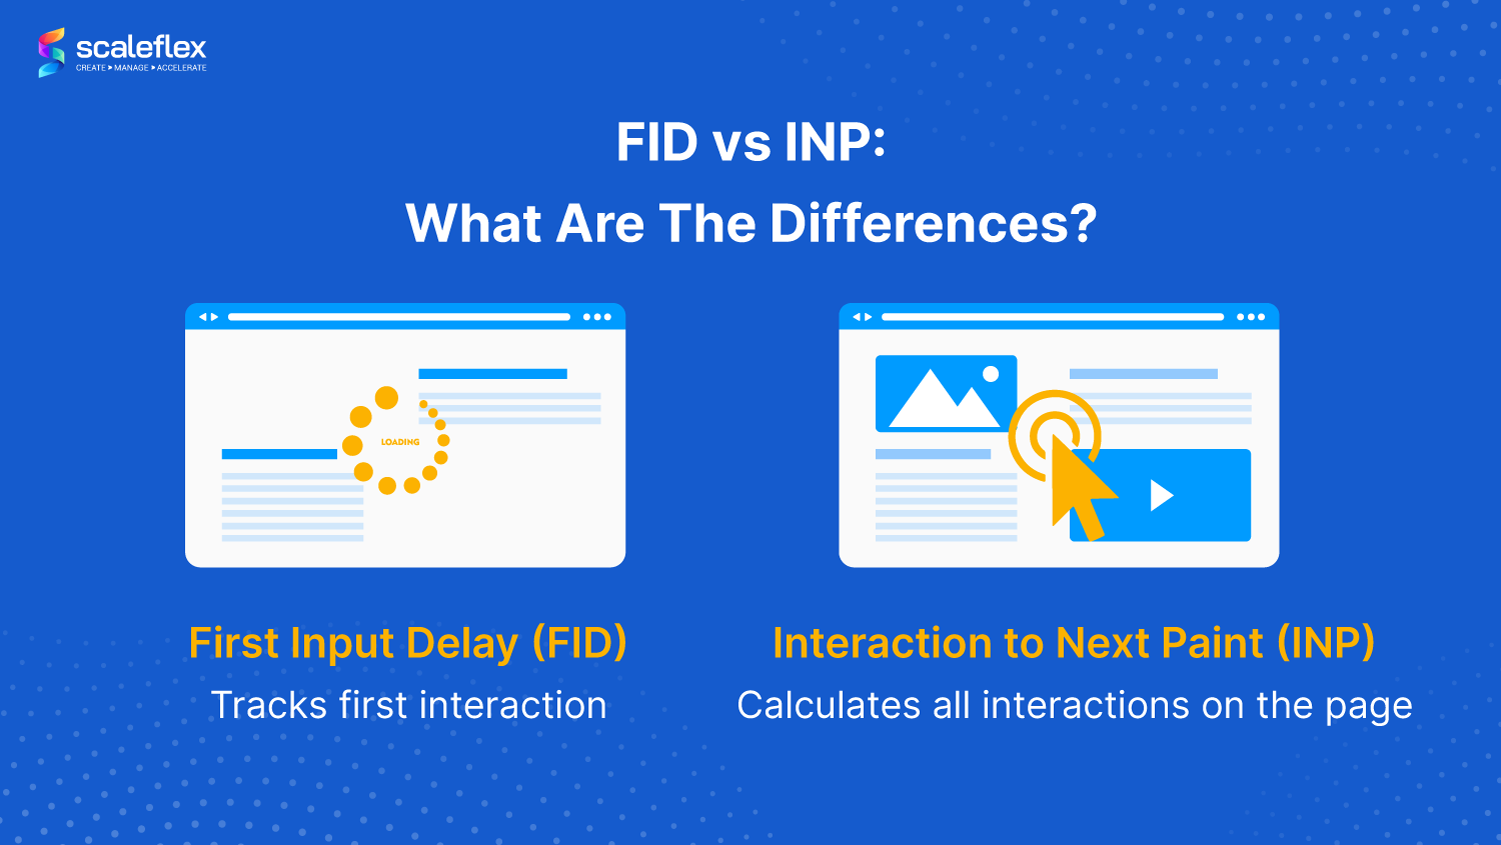 Differences between FID and INP